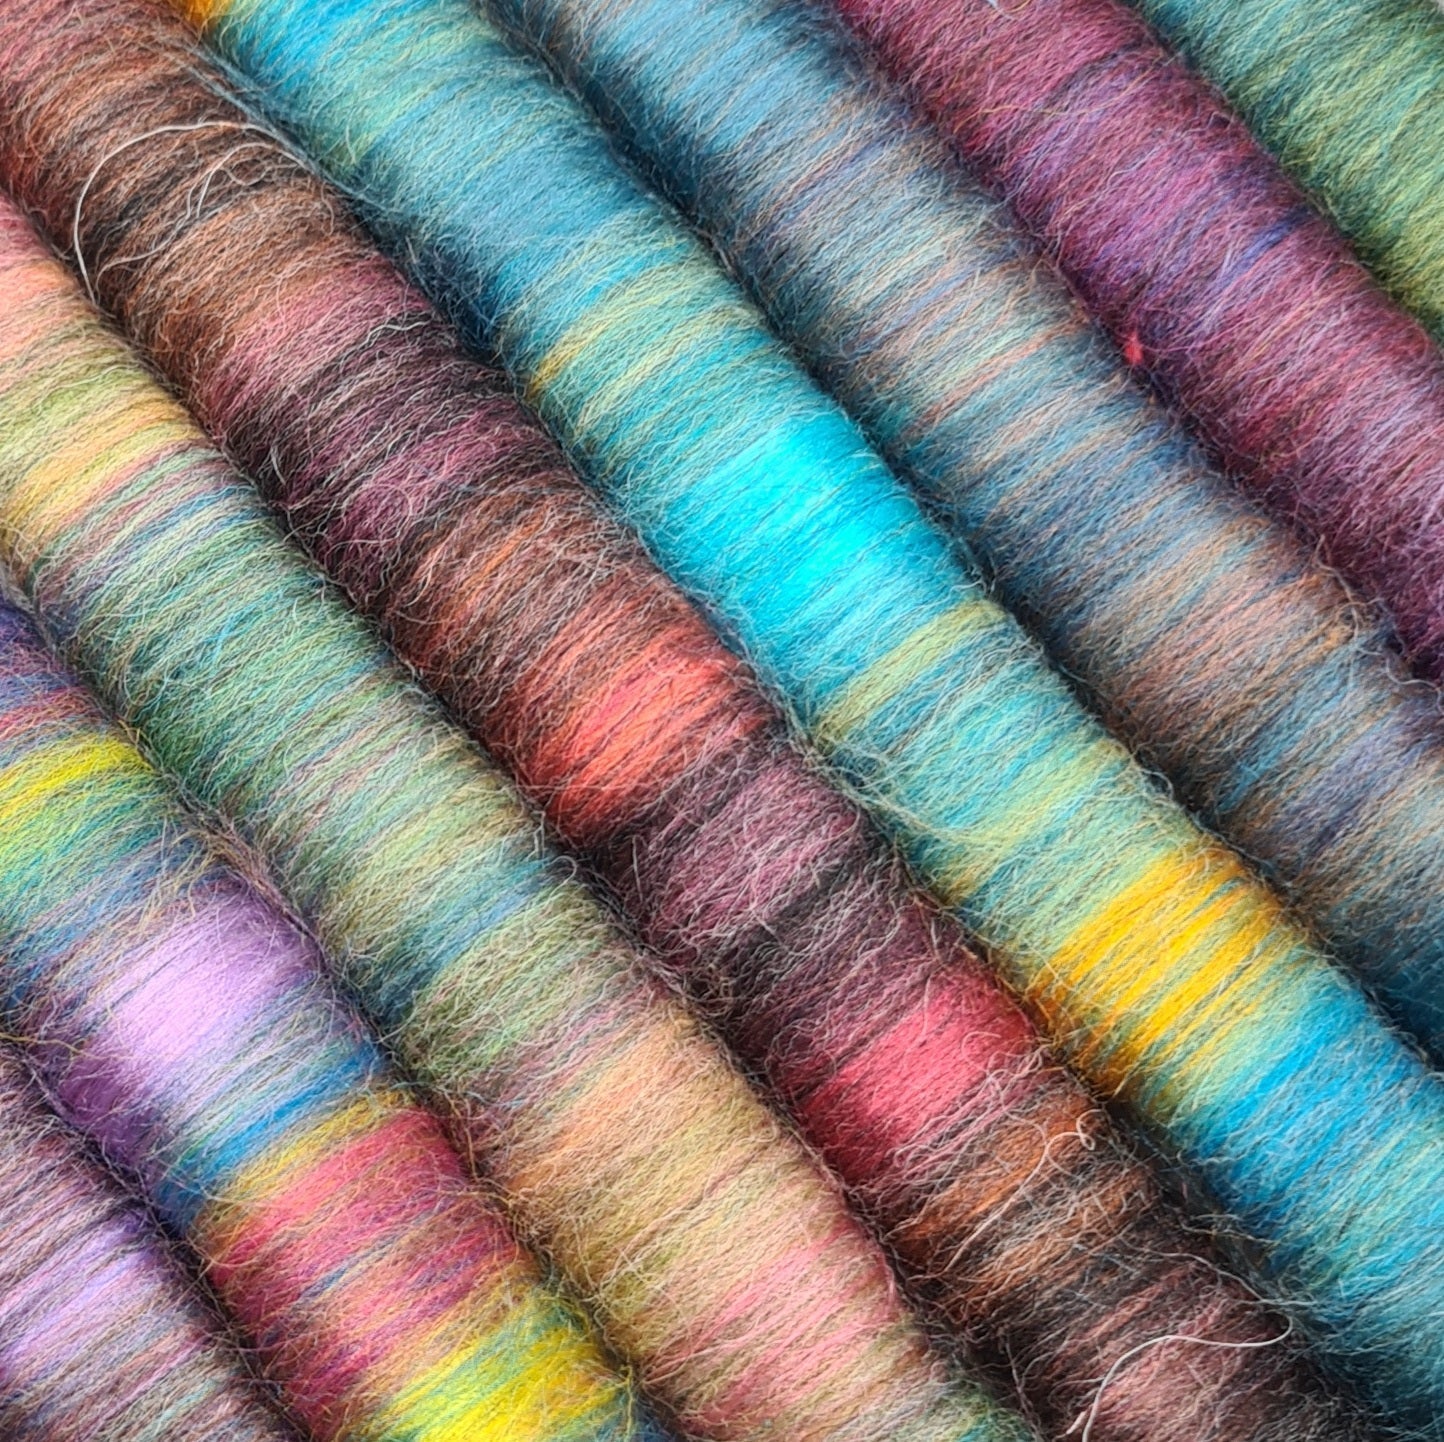 Rolags (or Punis) for spinning, Wallington,  Wool and Bamboo, Limited Edtion